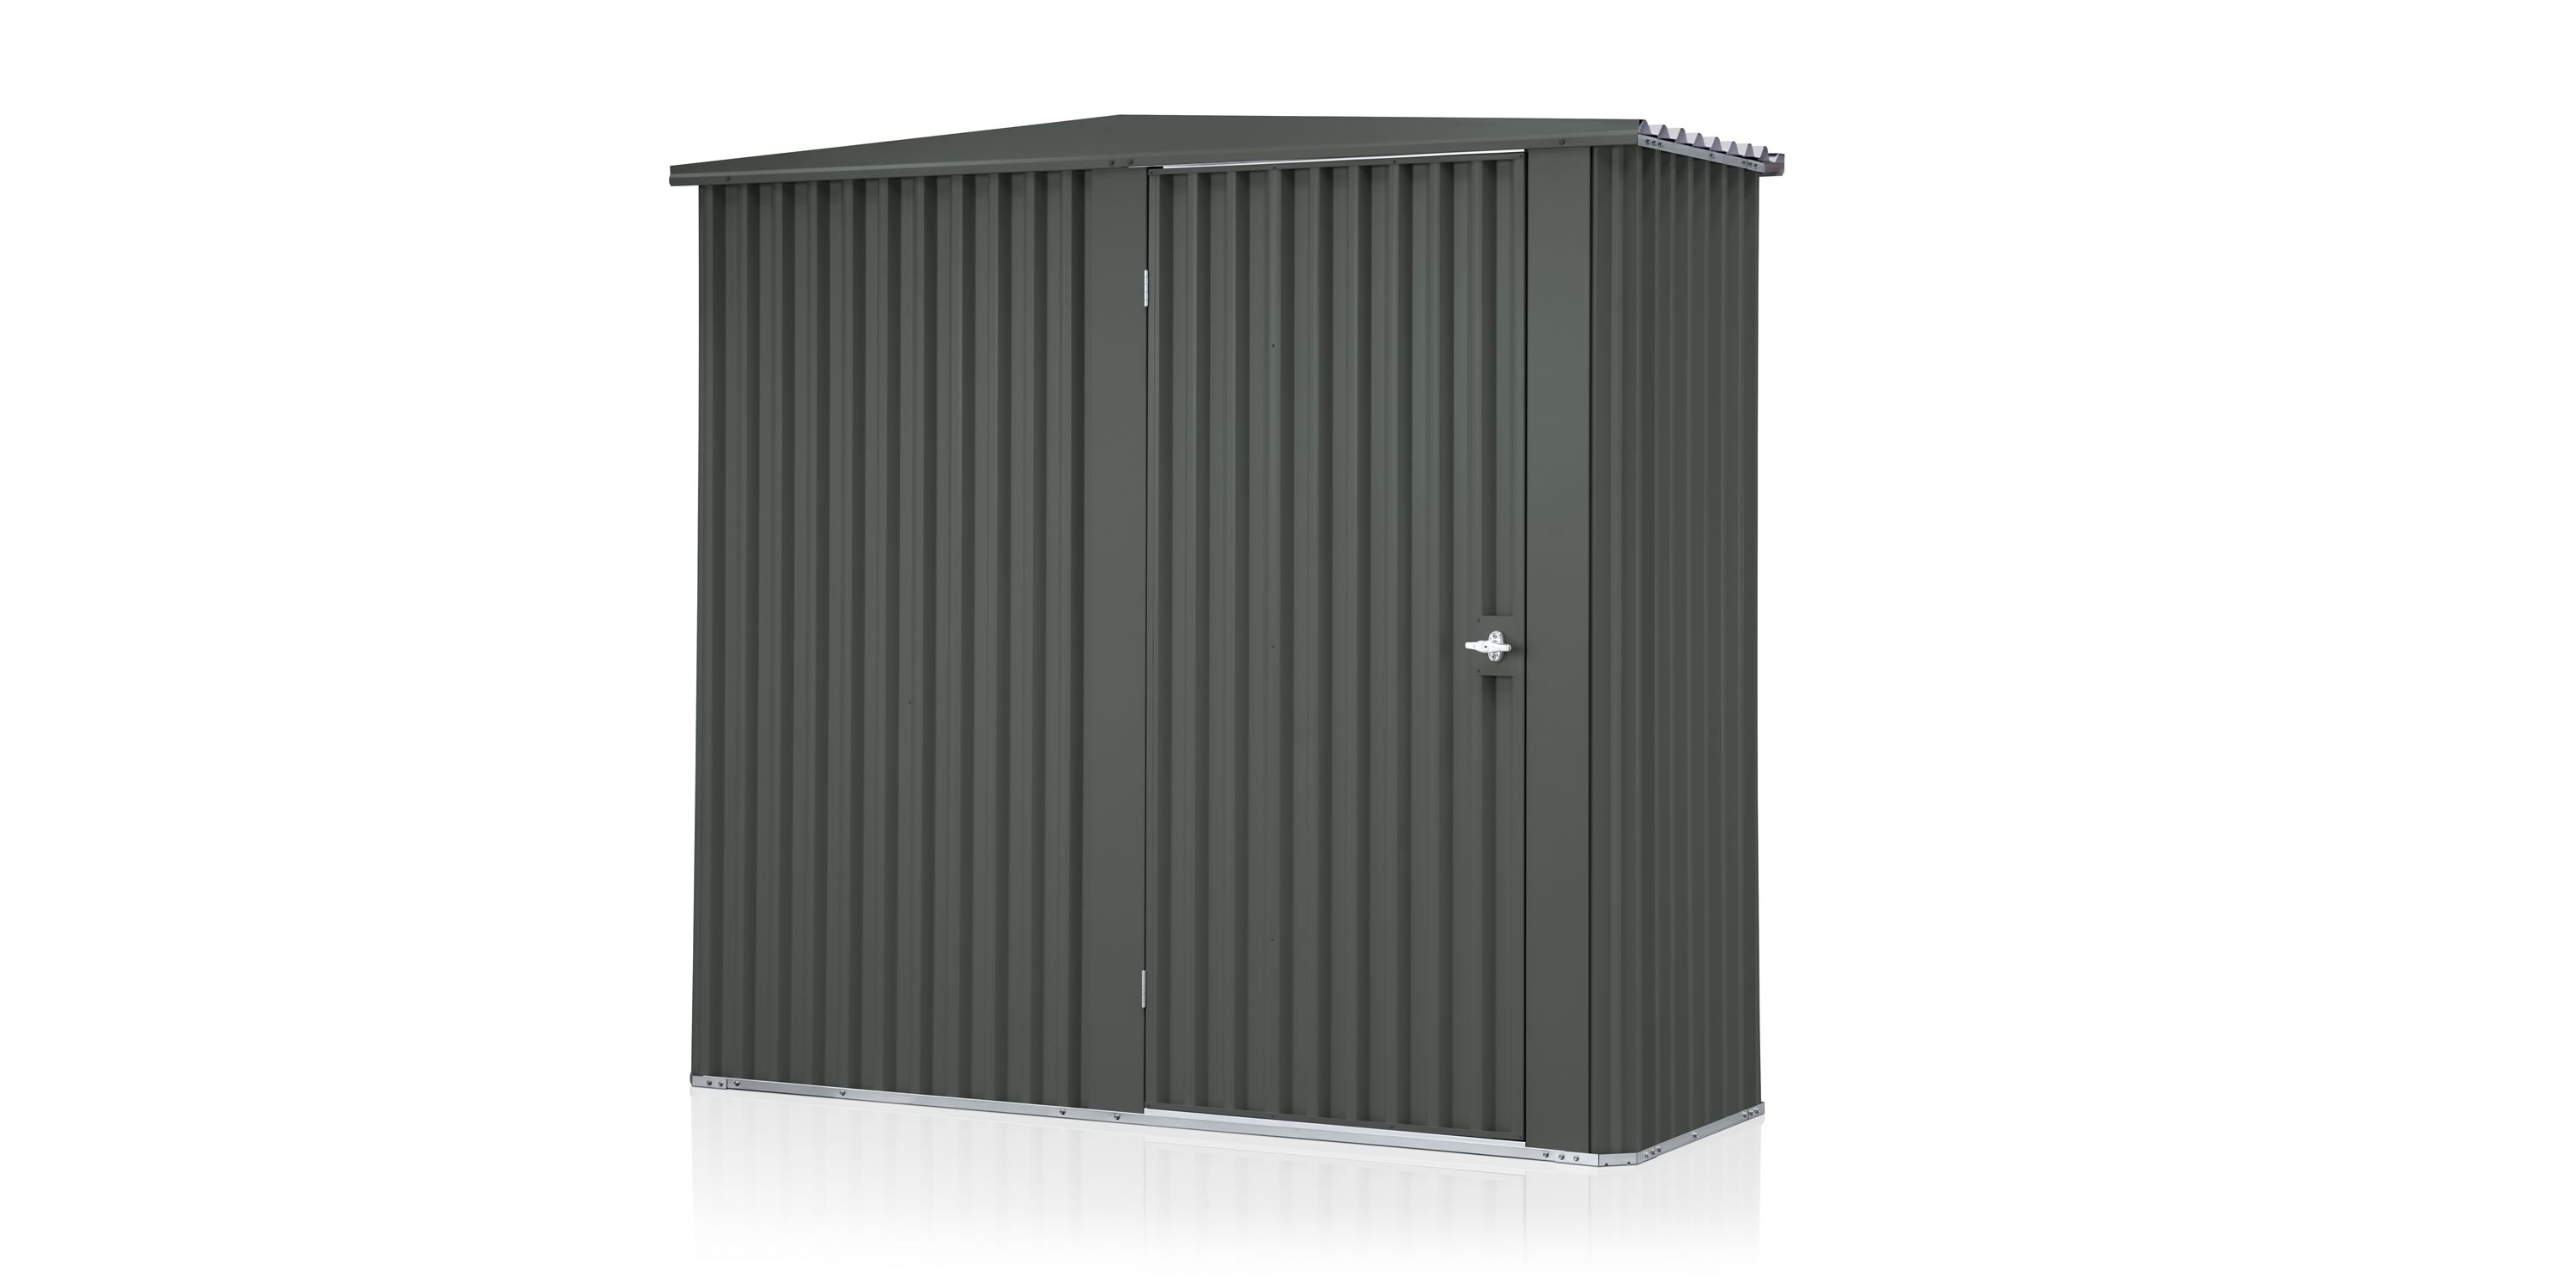 Handi-Mate Shed with hinged door (2210mm x 770mm x 1900mm)